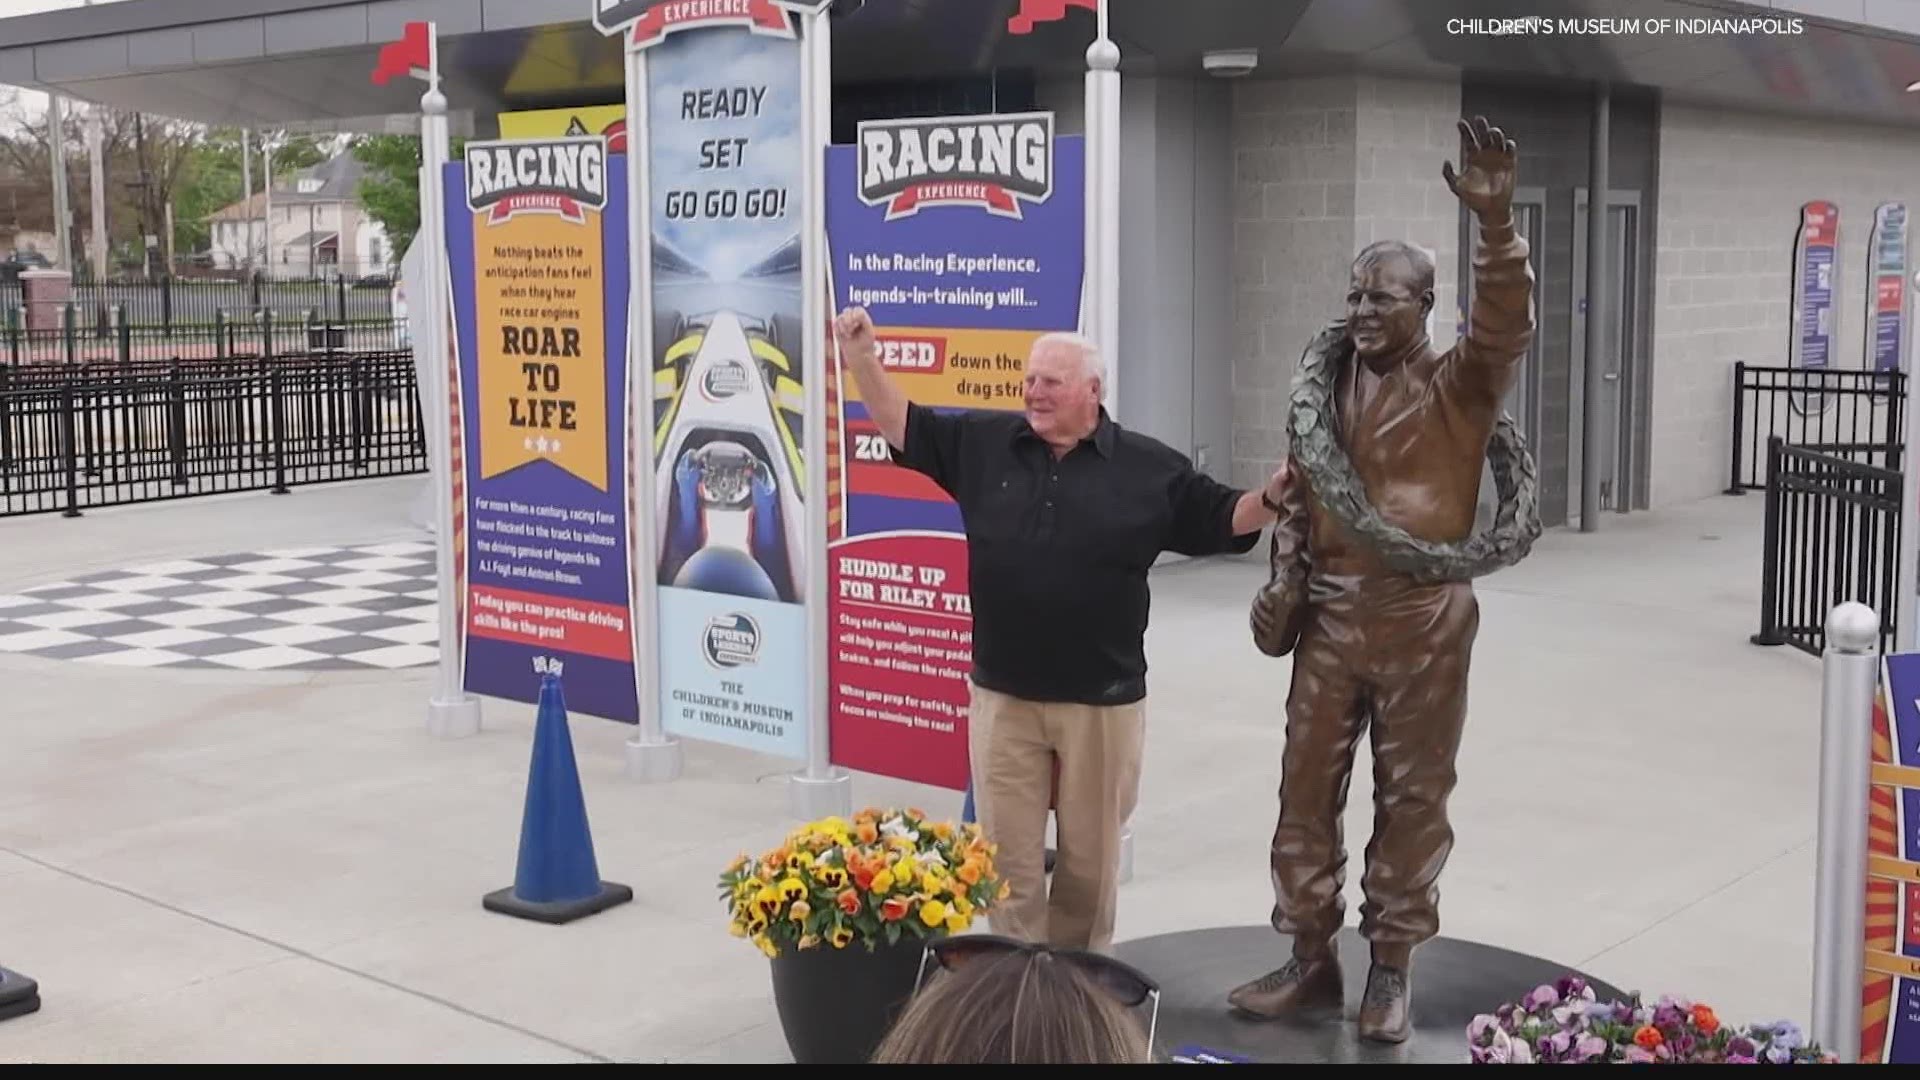 A.J. Foyt celebrated the 60th anniversary of his first Indianapolis 500 victory with a special appearance on Sunday at the Children's Museum of Indianapolis.